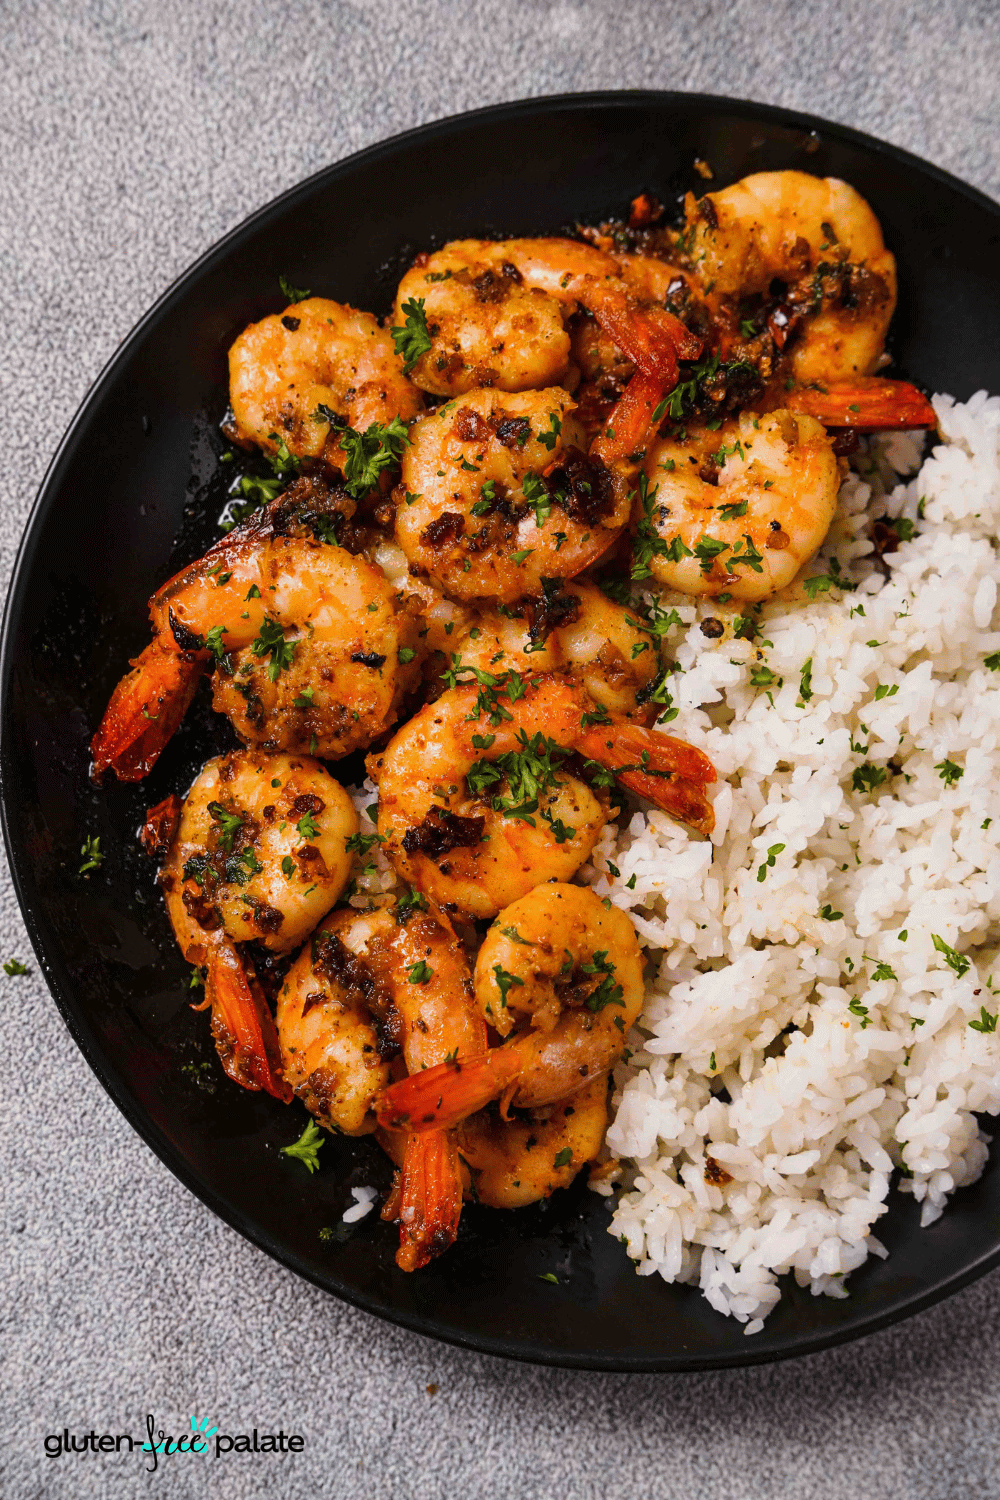 I love my garlic butter shrimp. It uses butter and fresh garlic to create a robust flavor, perfect as a main course.